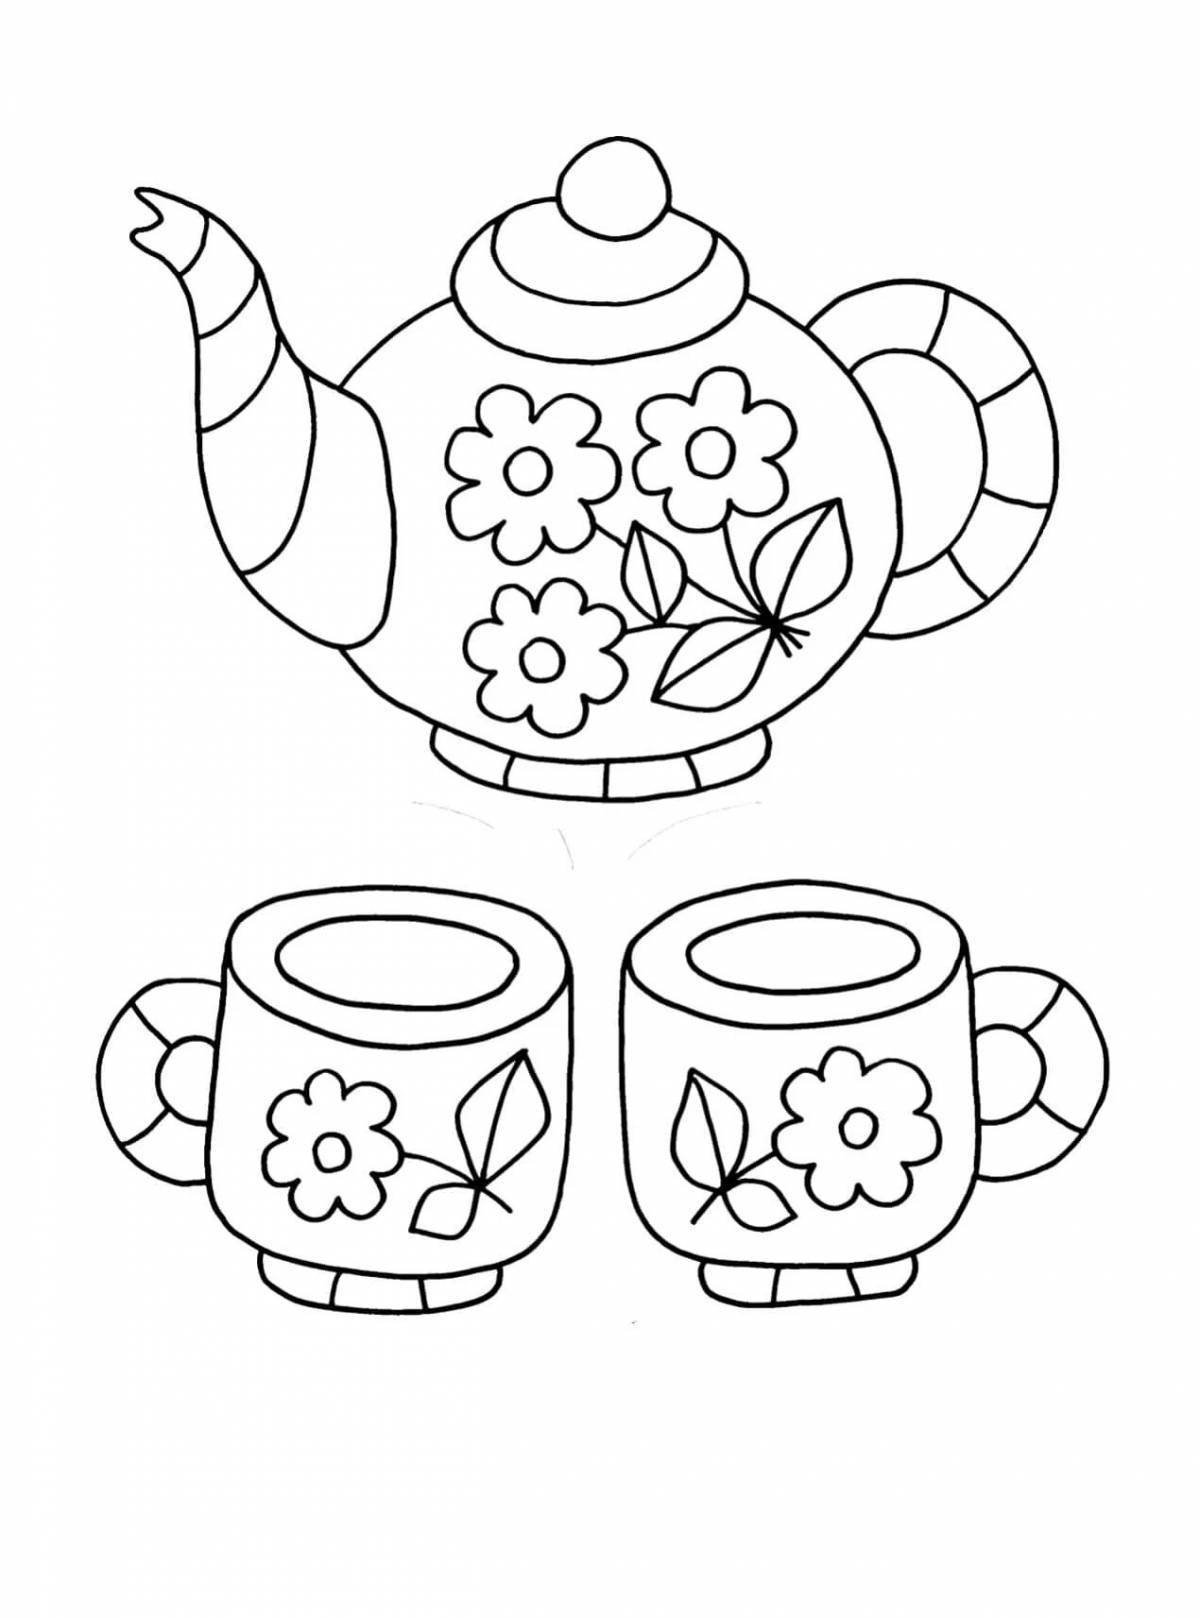 Colored coloring plates for children 5-6 years old